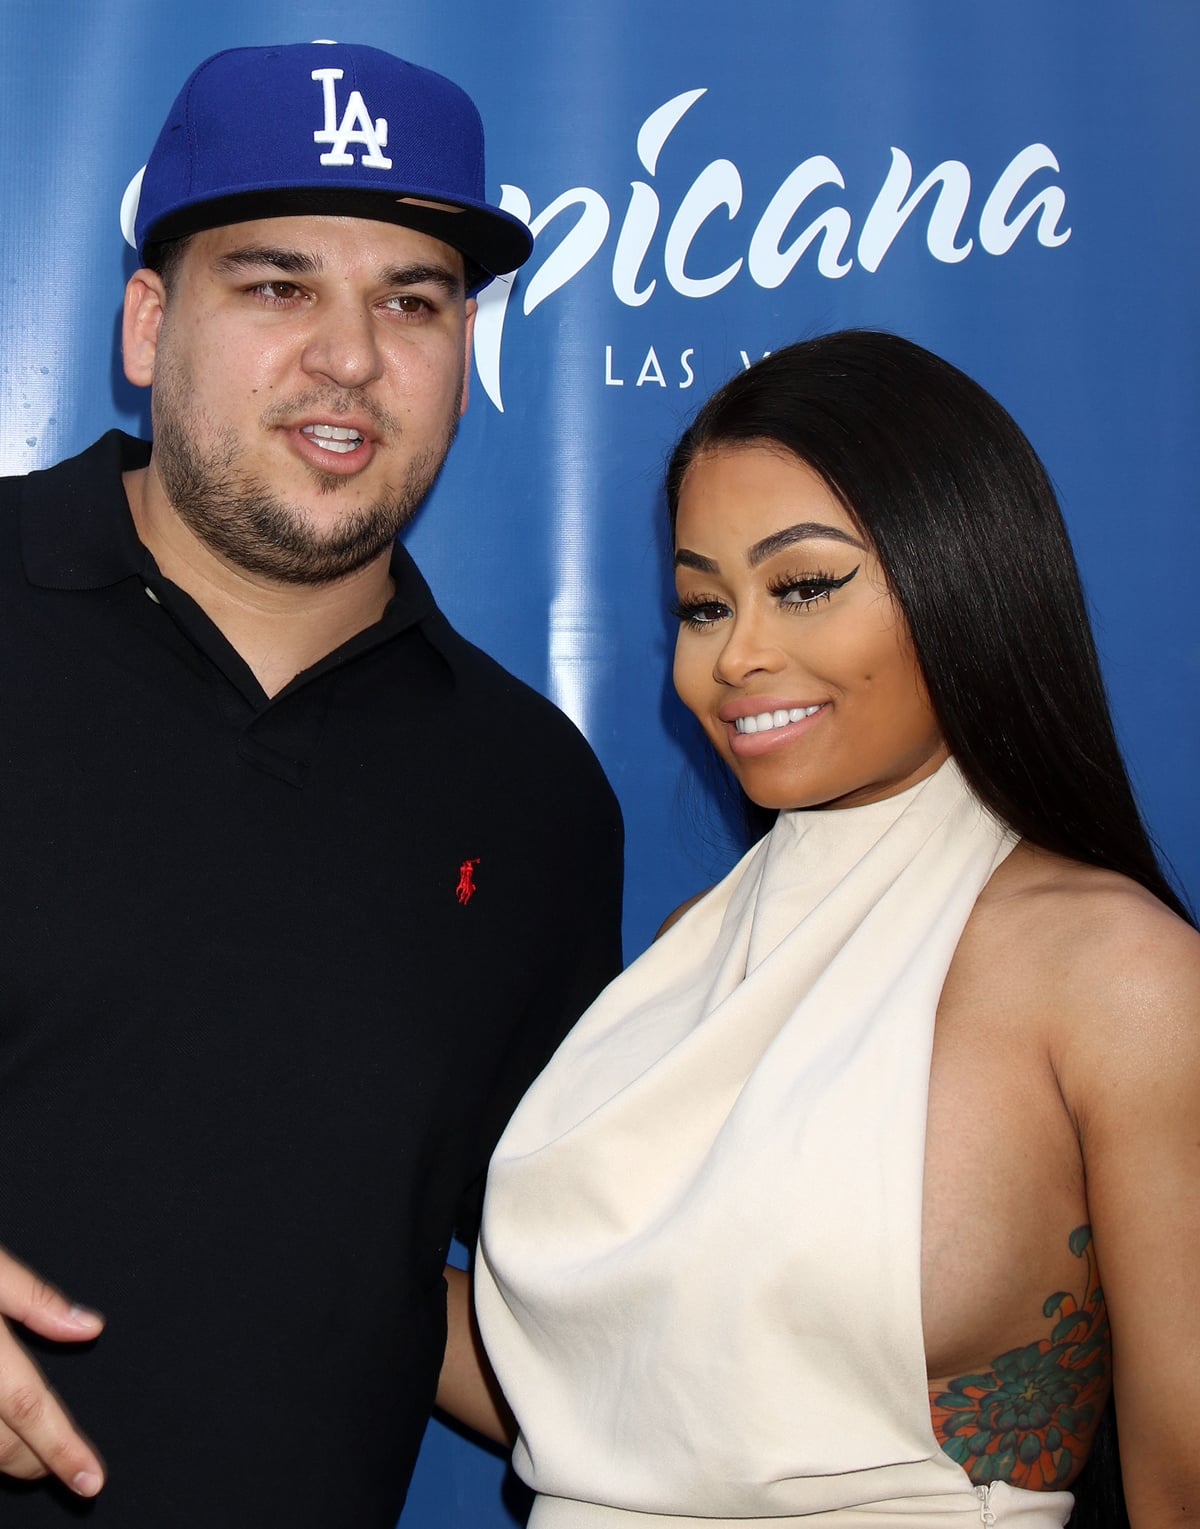 Rob Kardashian and Blac Chyna began dating in January 2016 broke up in the summer of 2017